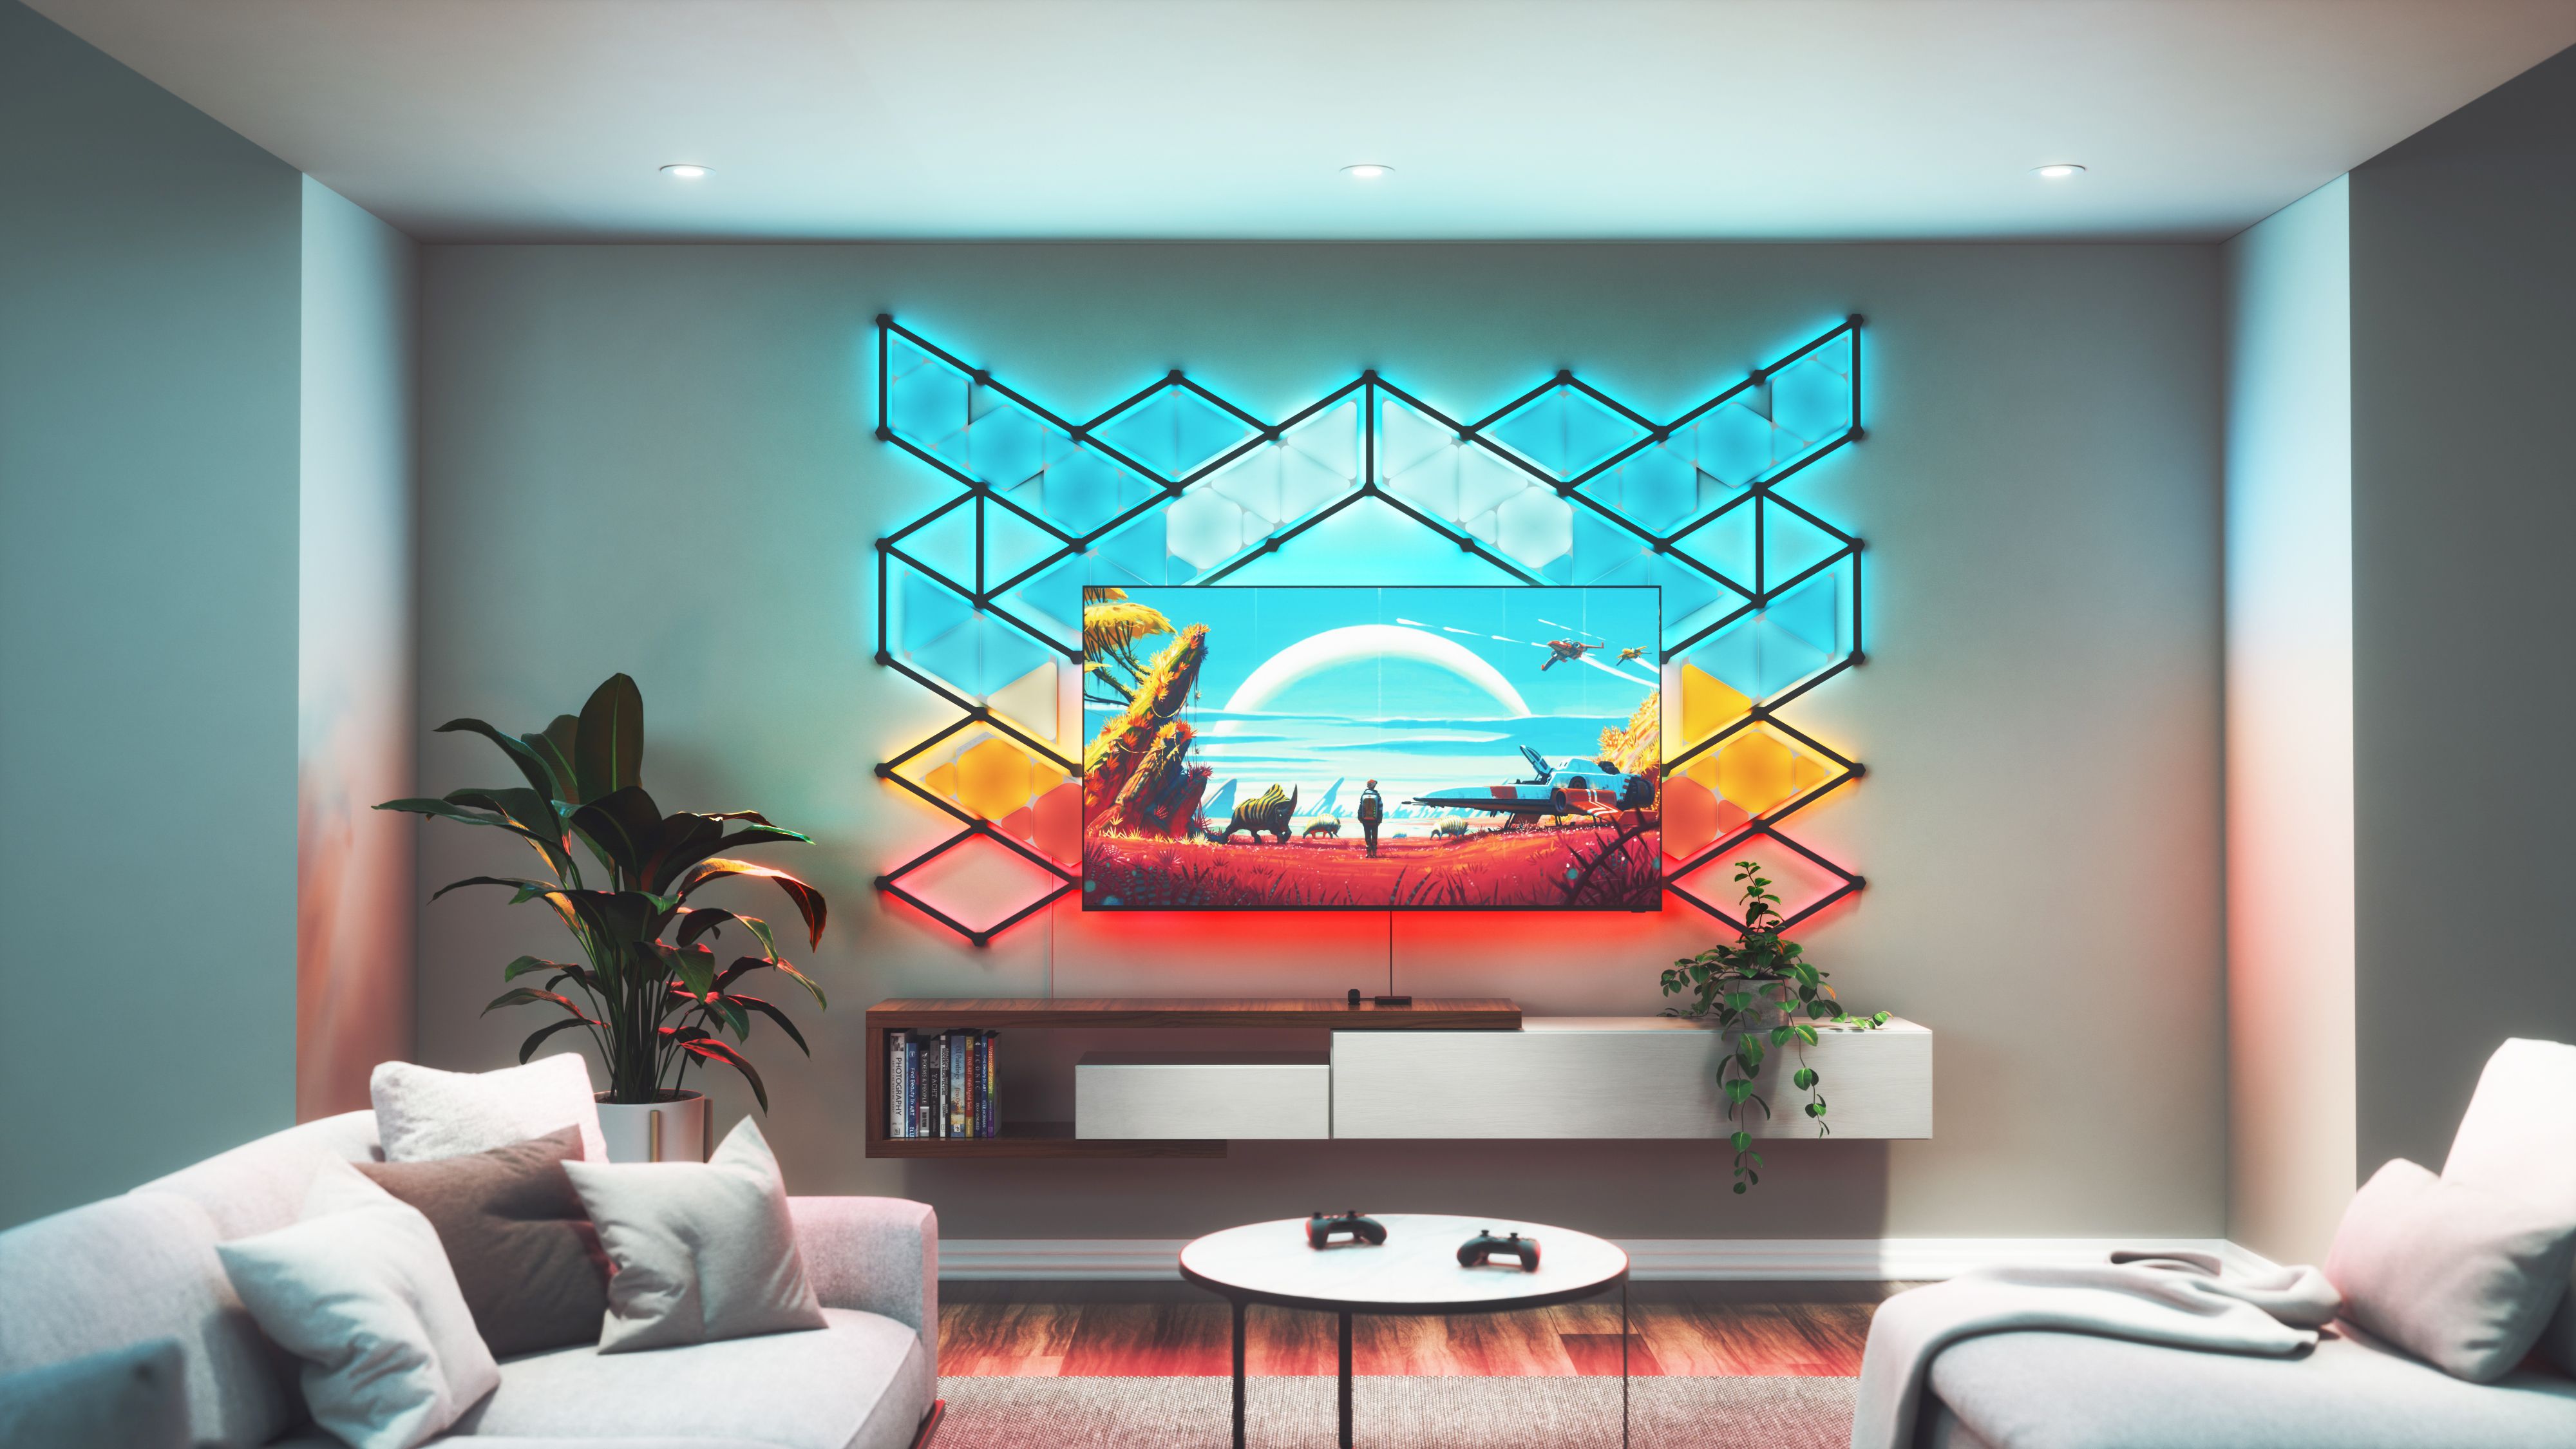 Nanoleaf expands its RGB lighting prowess into new products at CES